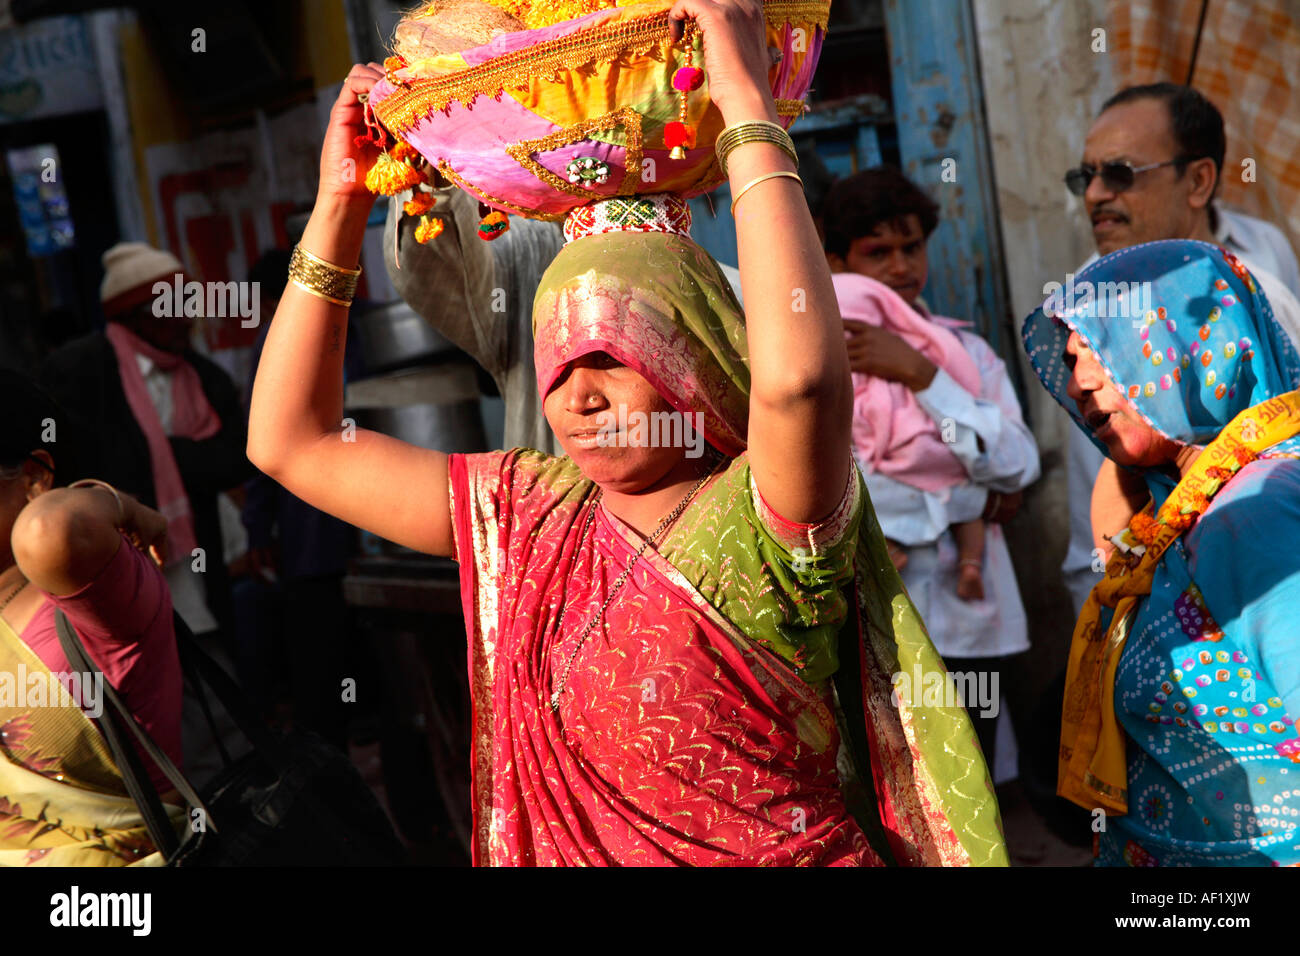 Indian female carrying basket of garlands on head walking through crowd celebrating holi spring festival of colours, Dwarka, Gujarat, India Stock Photo